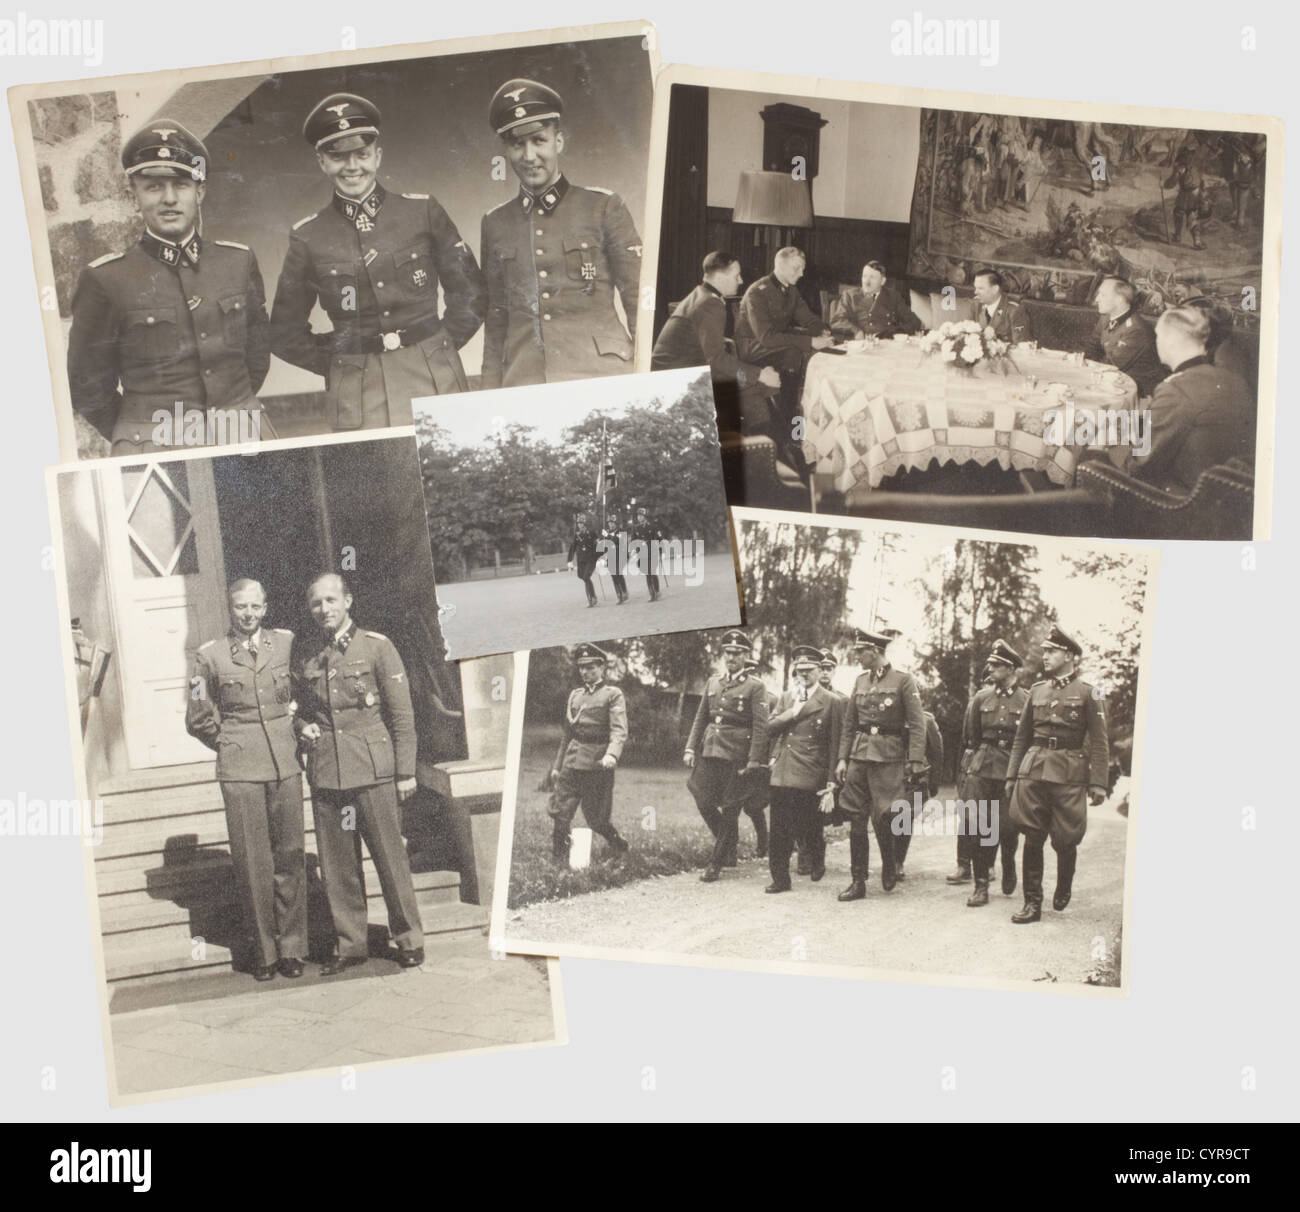 Fritz Darges - Fritz Klingenberg,Photographs and books Four large format photographs(12.5 X 17.5 cm two trimmed on the lower edge)each inscribed on the back,three with Hoffmann stamps: Darges and Klingenberg in front of the entrance to the Hohenlychen SS-Military Hospital in 1943. Darges,Klingenberg and Laackman at the Berghof in May 1941. 'Tea in the Berghof - from left to right,Major Engel - Hpstuf.(Captain)Klingenberg - The Führer - SS Gruf.(Major General)Schaub - F.D. - Laackman - May 1941'. Conference at Führer HQ,Wolfsschanze in 1943 with Kalte,Additional-Rights-Clearences-Not Available Stock Photo